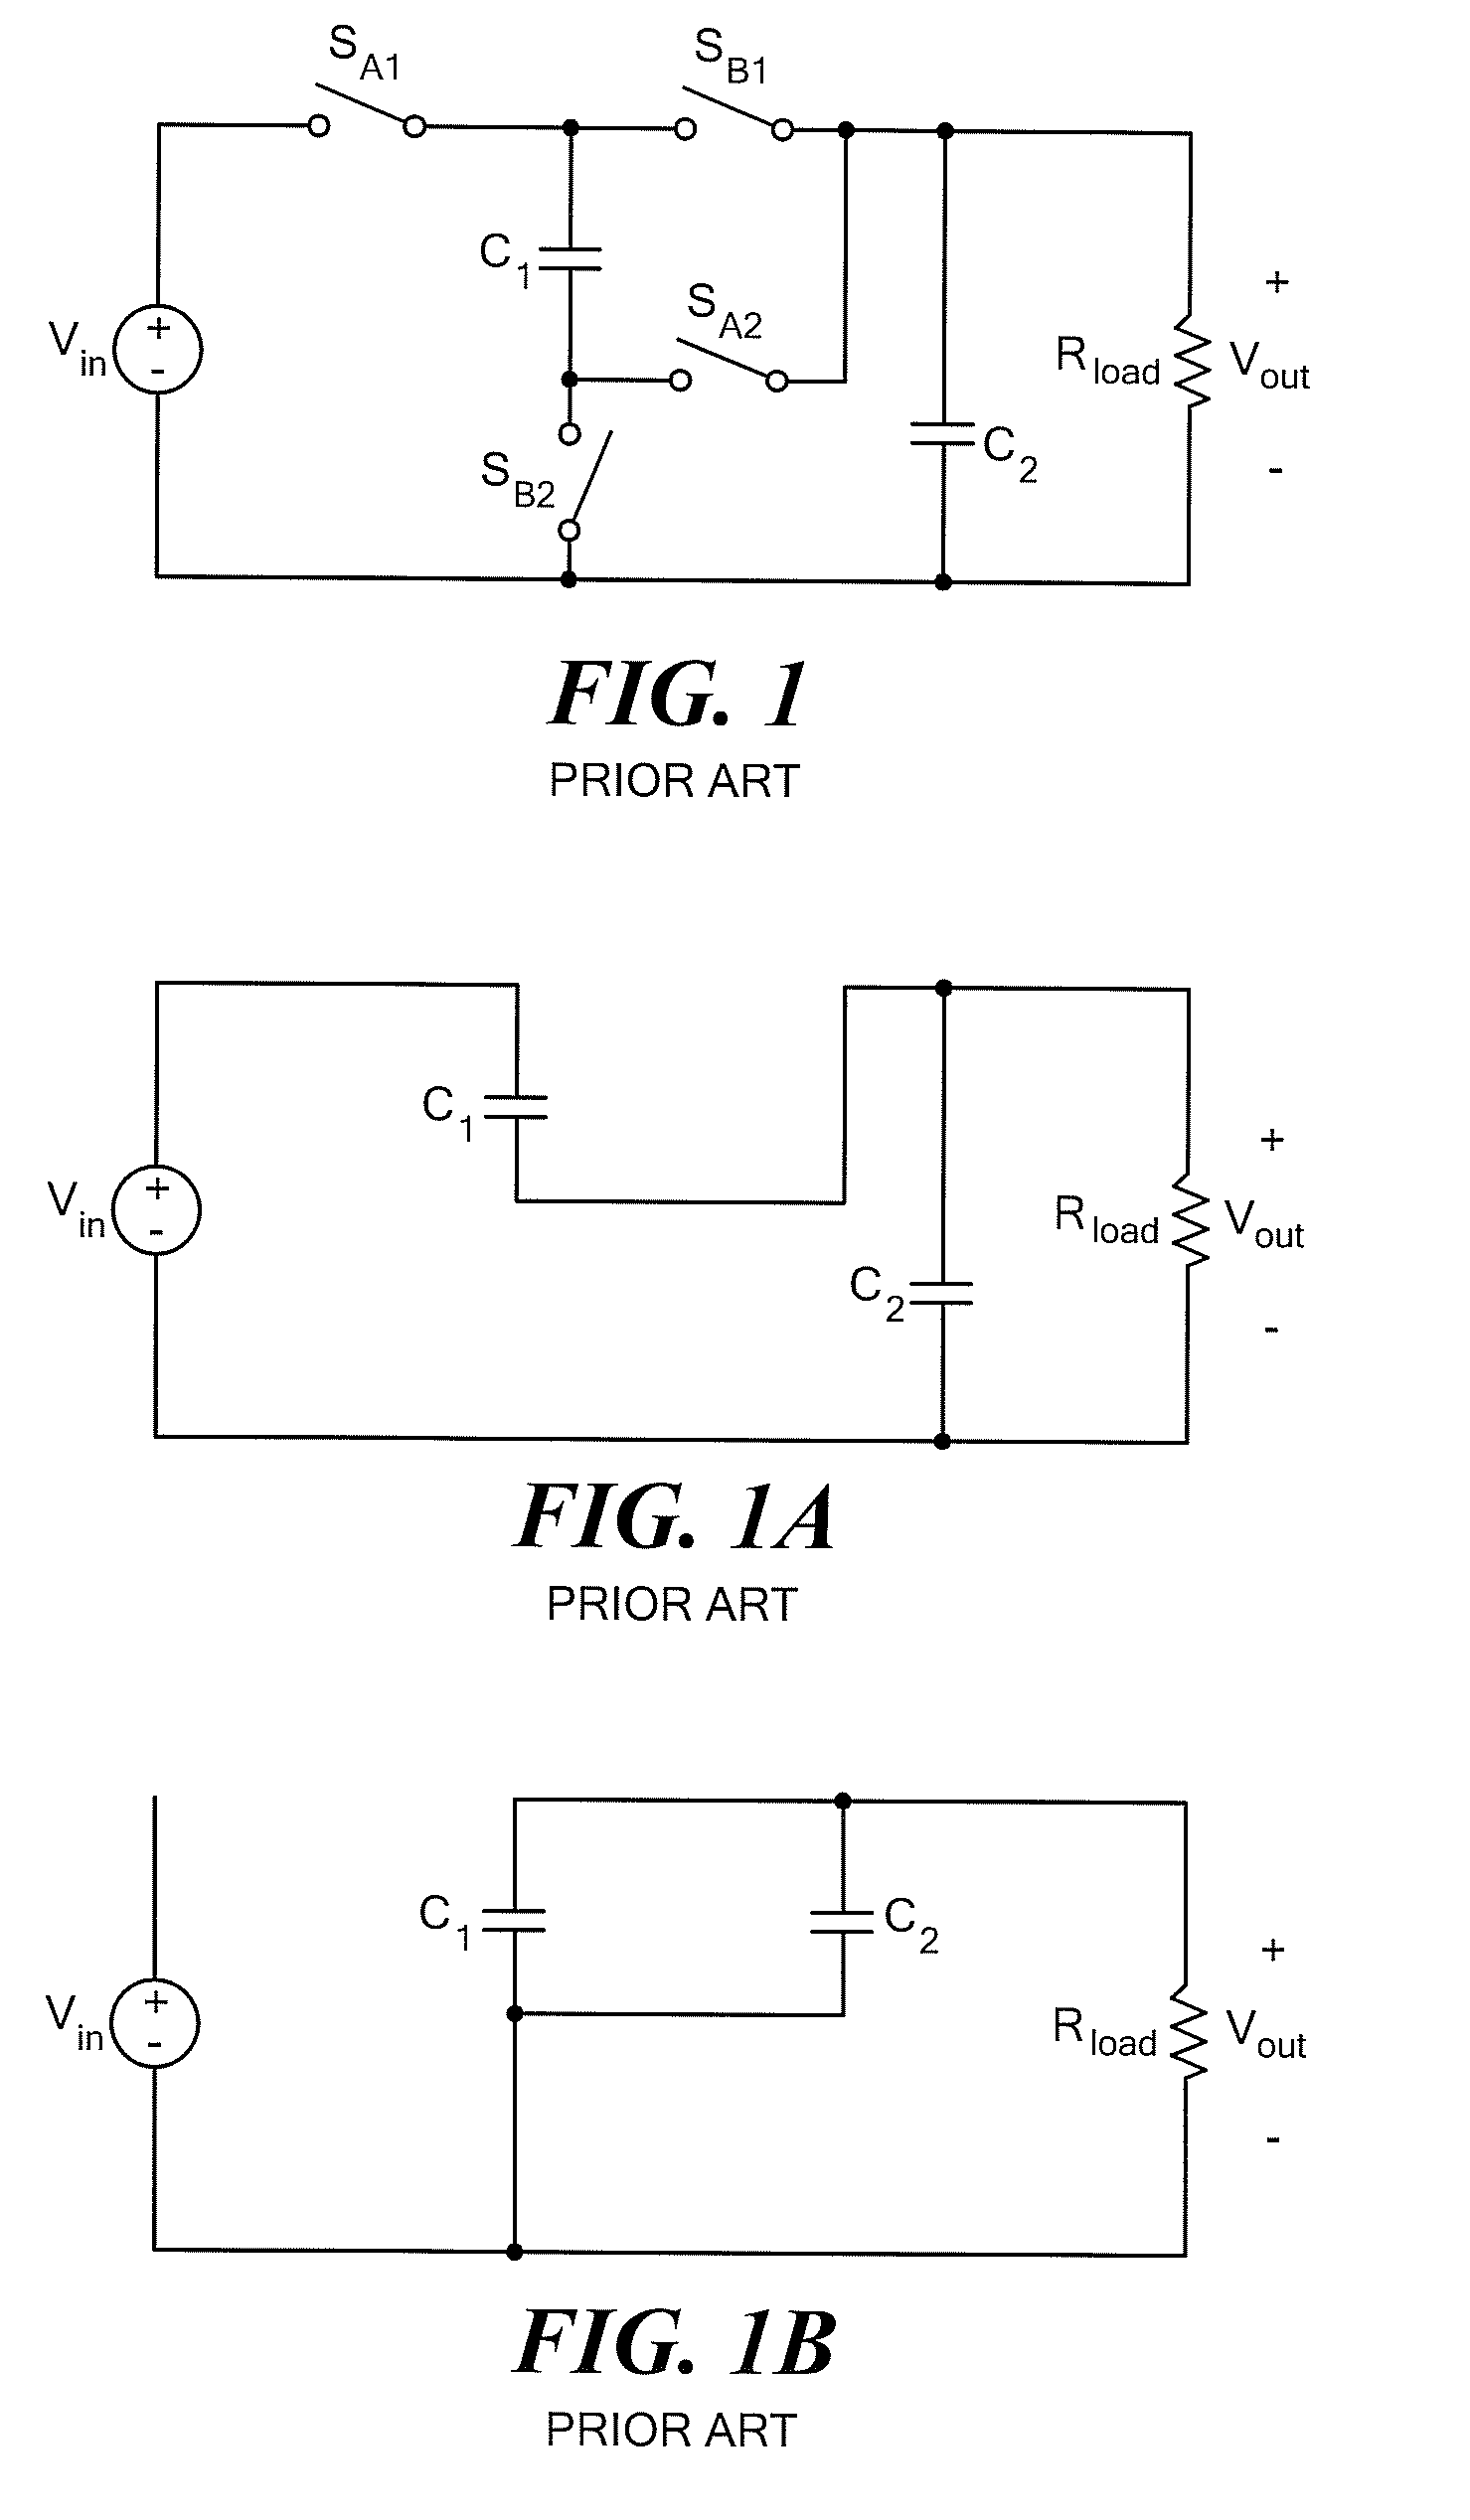 Power Converter with Capacitive Energy Transfer and Fast Dynamic Response